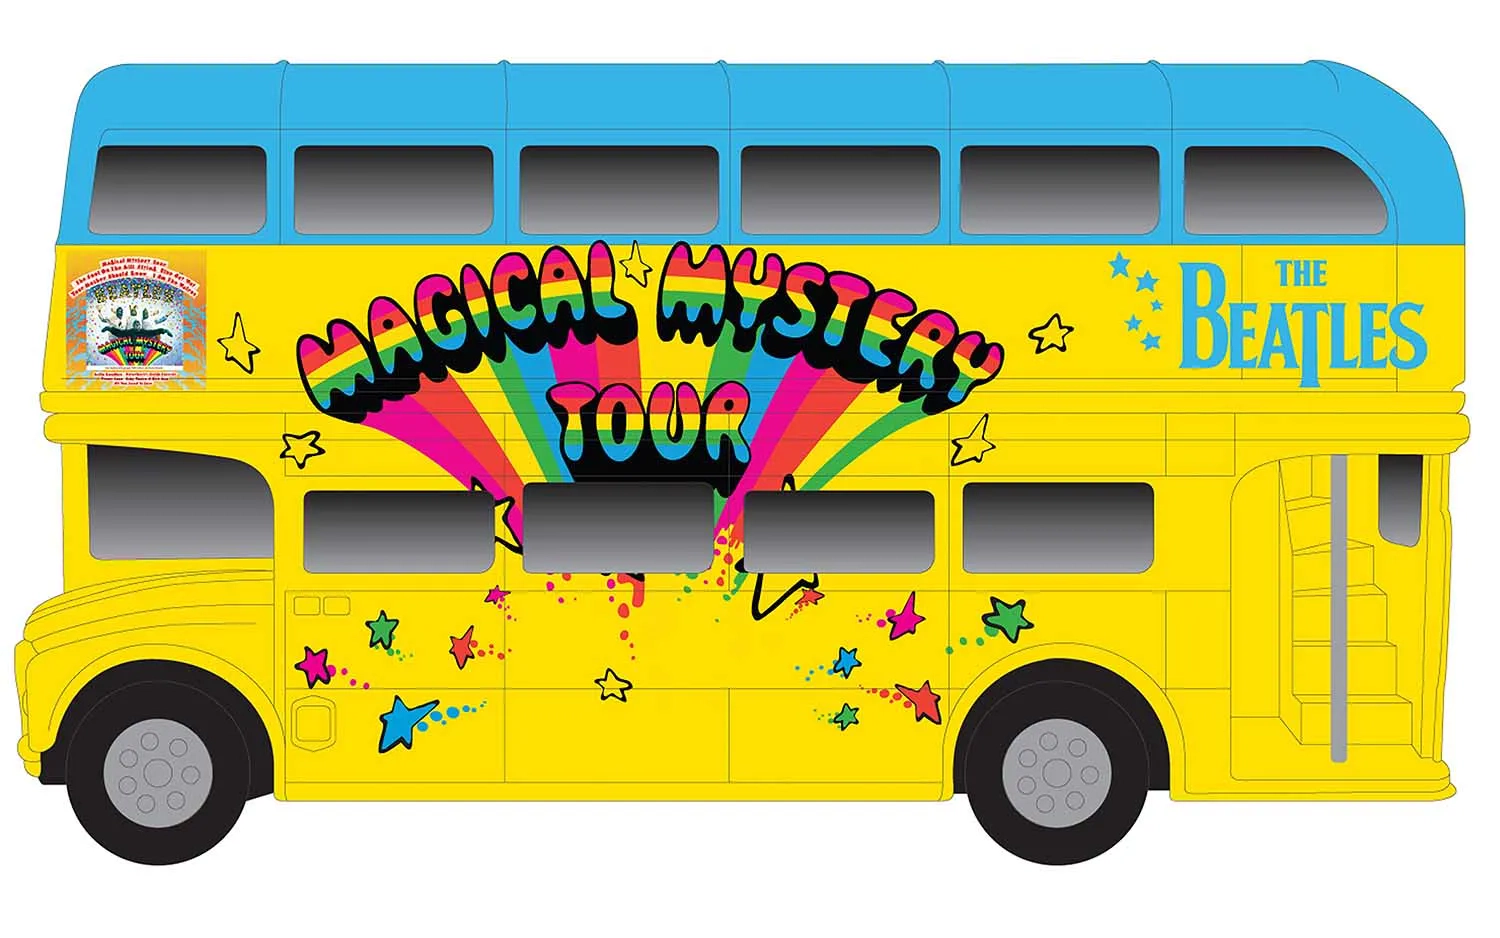 The Beatles London Bus - Magical Mystery Tour